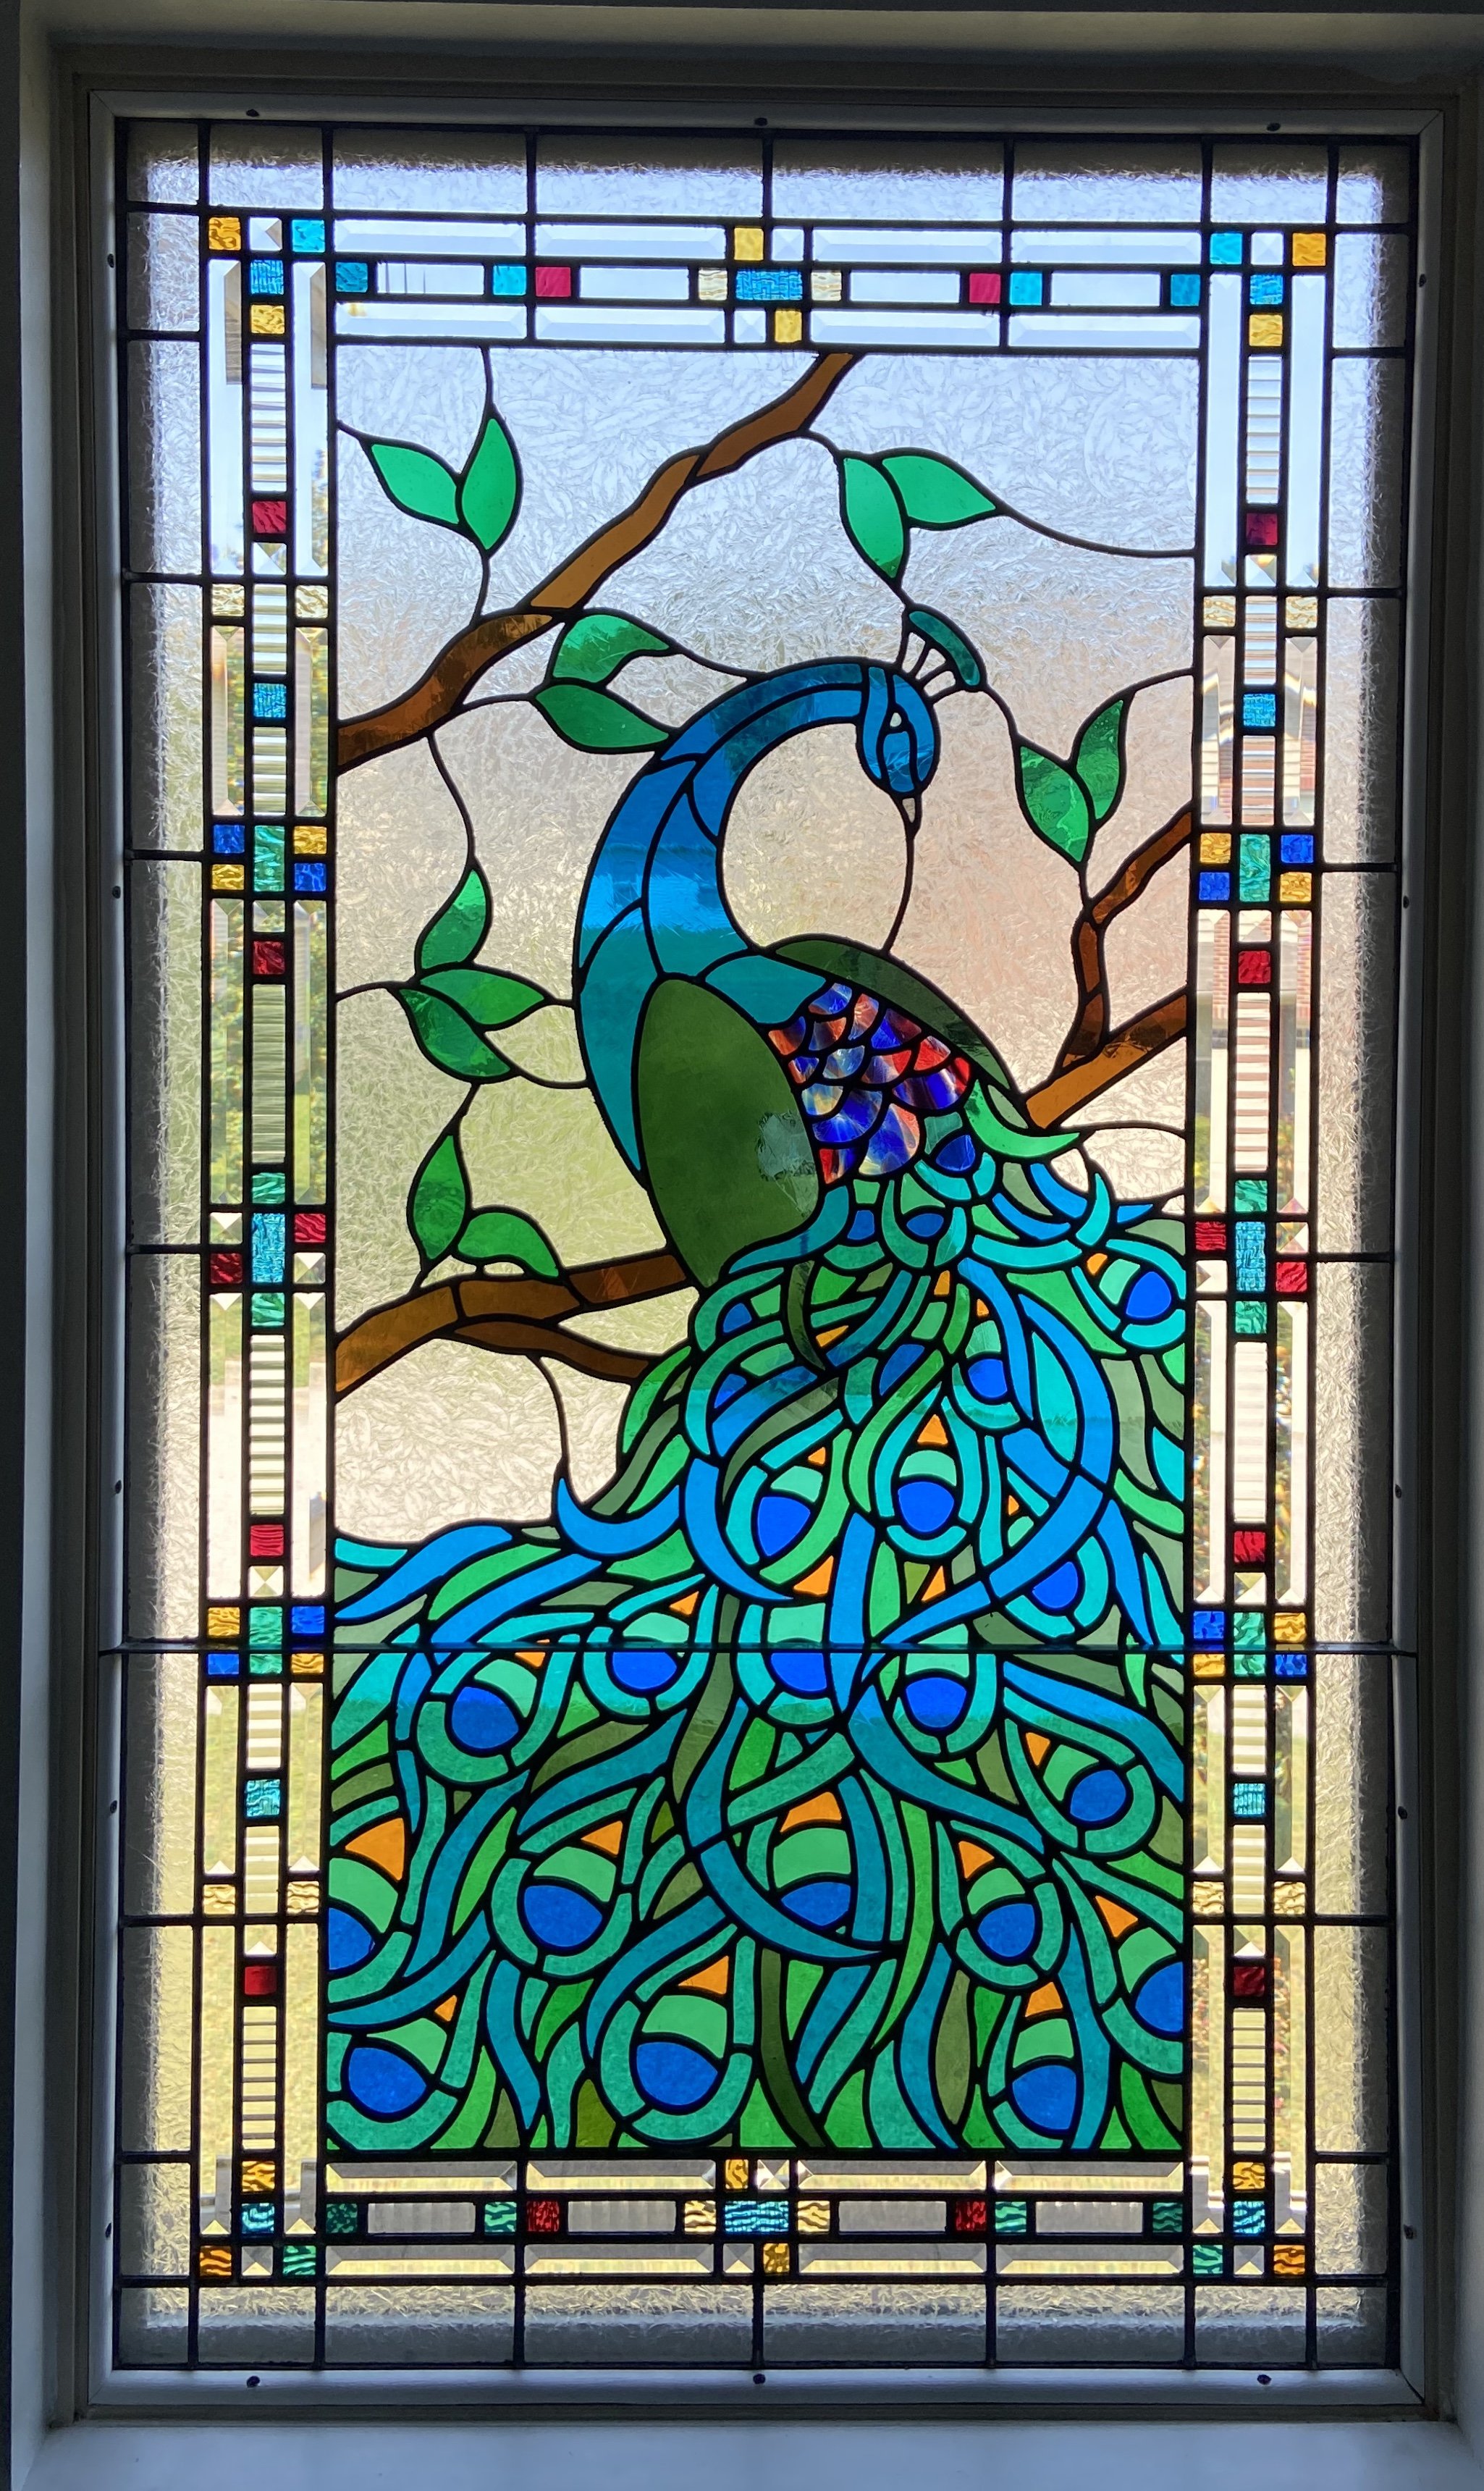 Hi all! I'm new to stained glass and would love to know if this